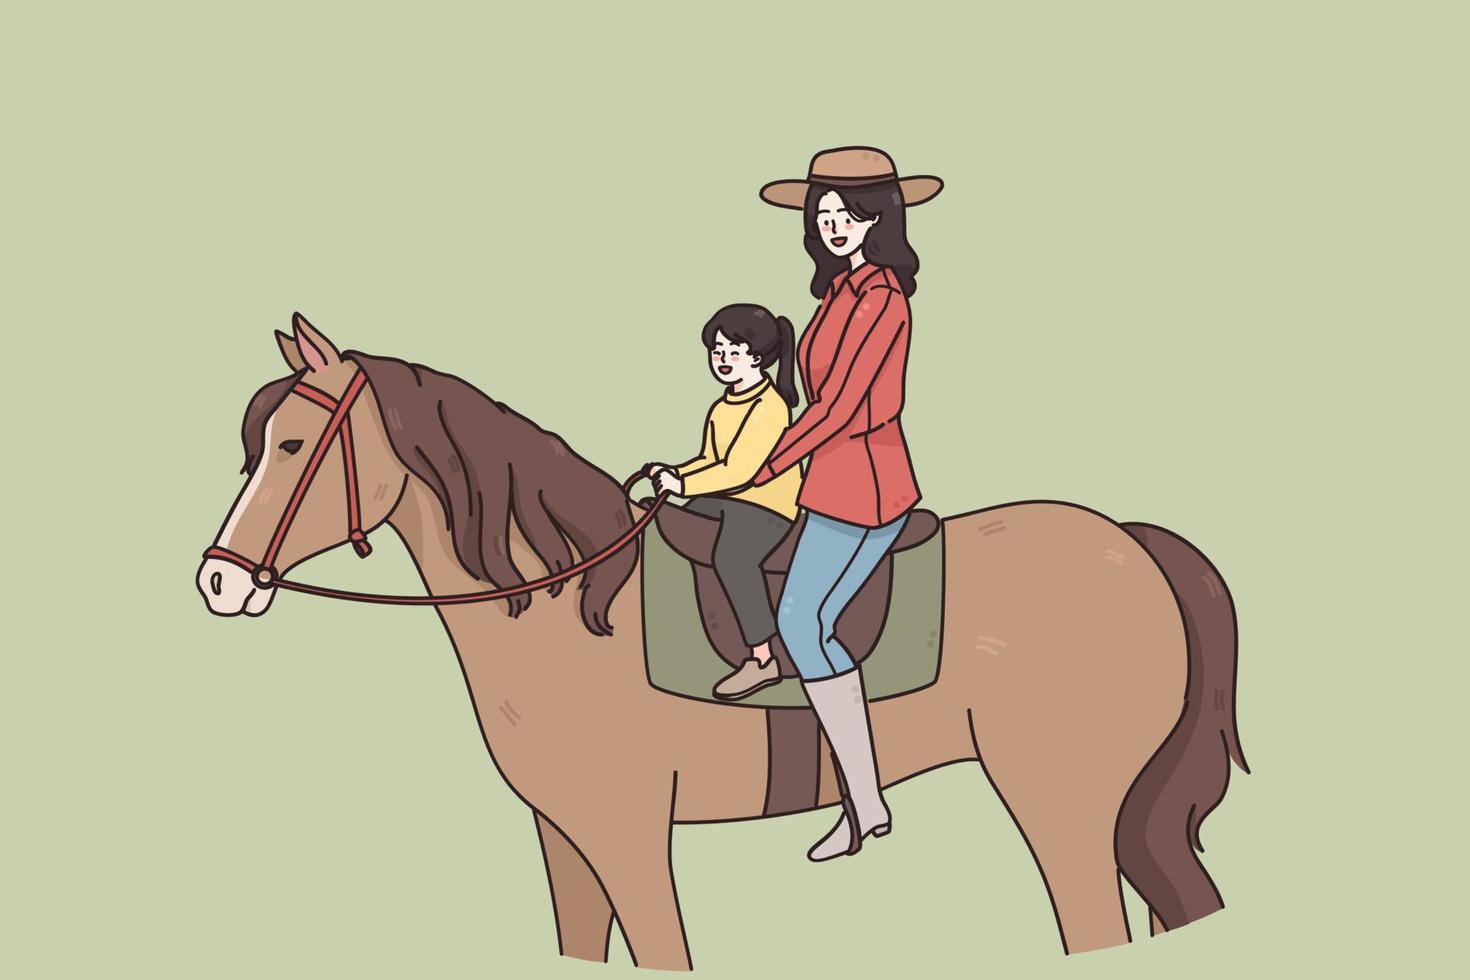 Summer activities and riding concept. Young smiling woman mother and small daughter sitting on horse and riding together outdoors vector illustration